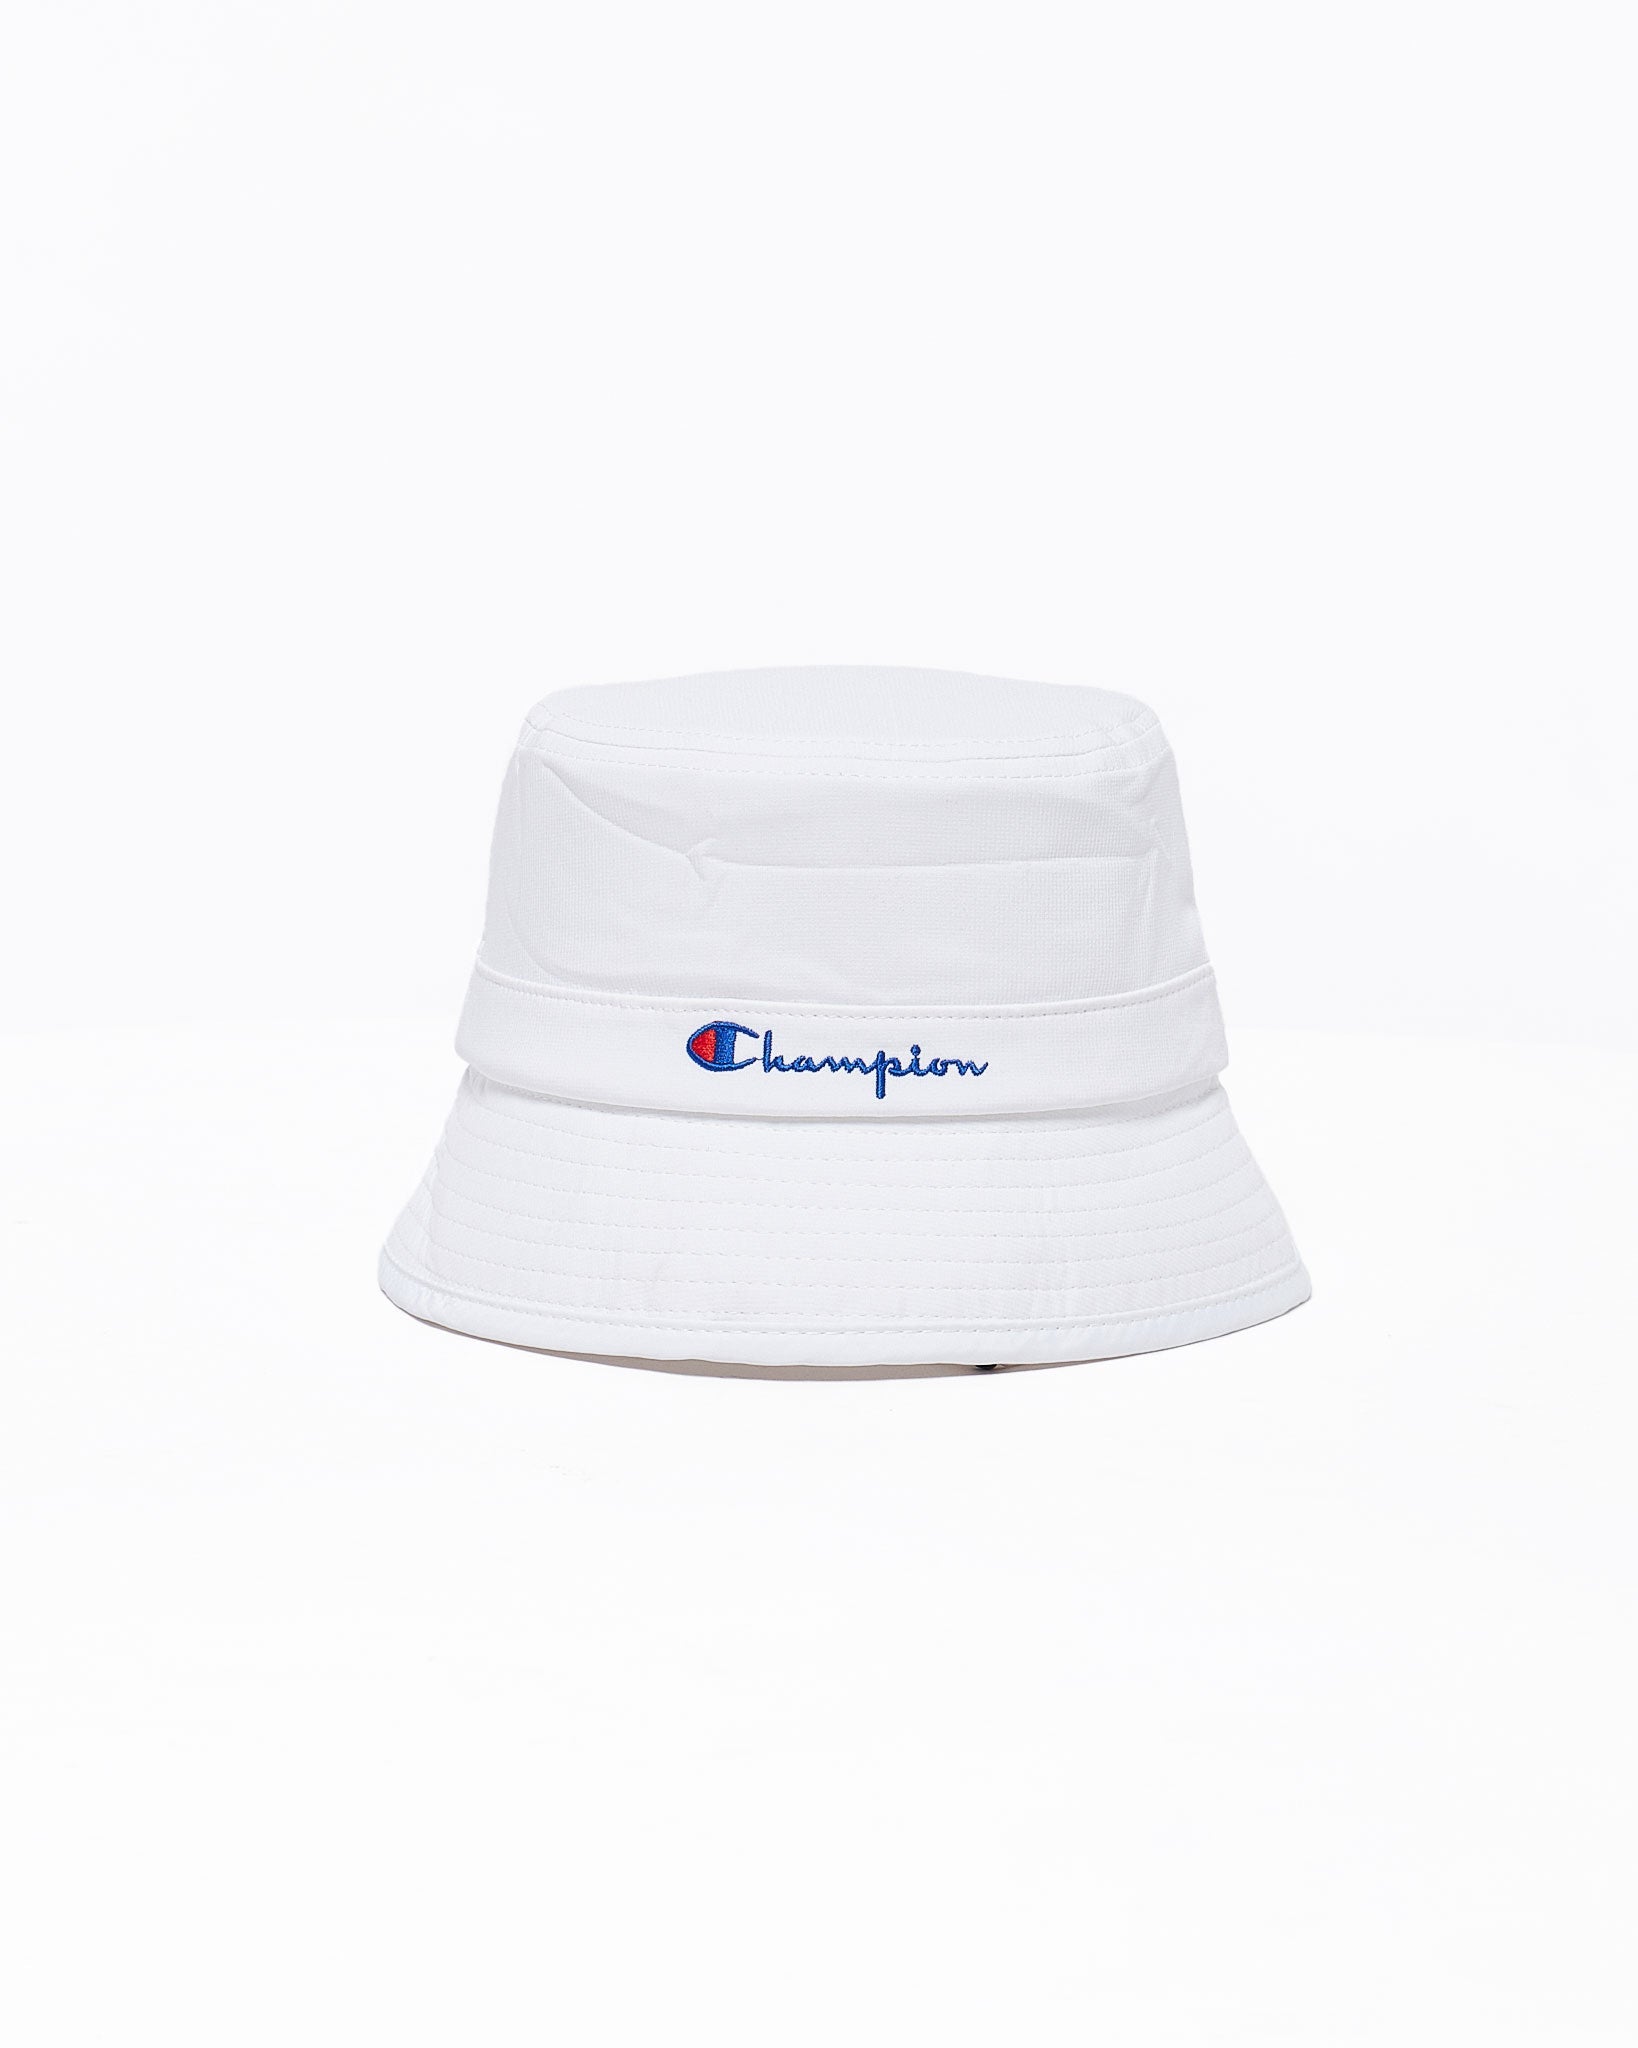 MOI OUTFIT-Champion Logo Embroidered Unisex Bucket Hat 10.90